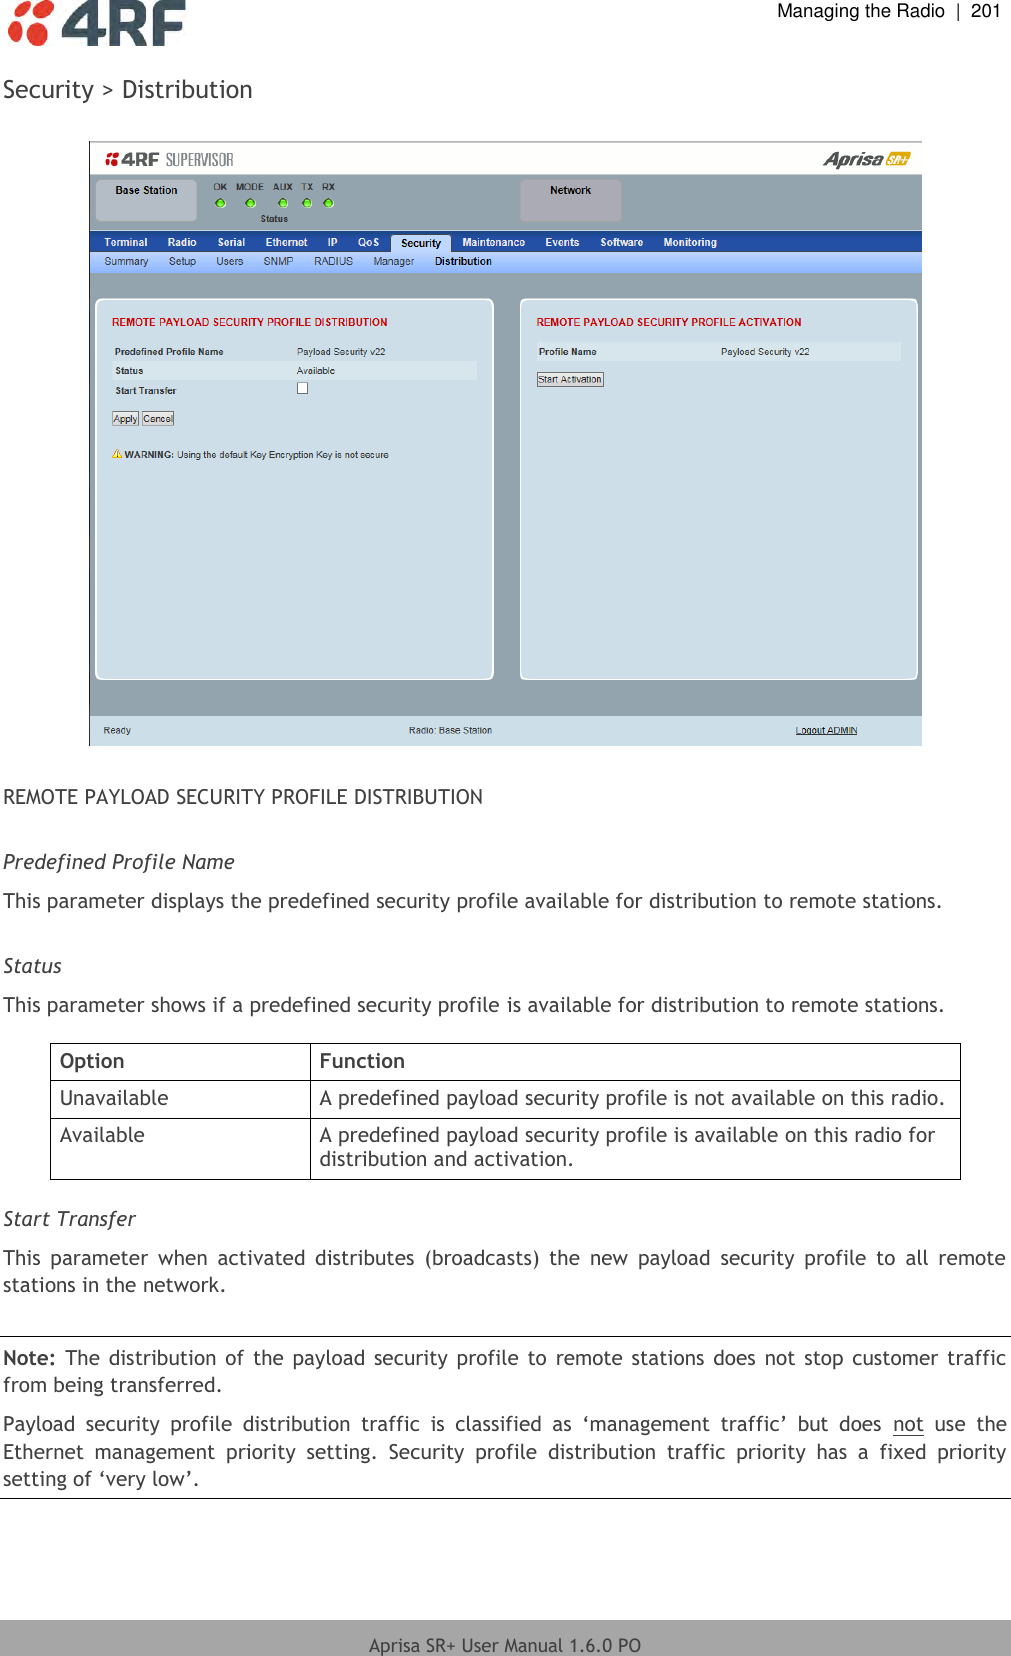  Managing the Radio  |  201  Aprisa SR+ User Manual 1.6.0 PO  Security &gt; Distribution    REMOTE PAYLOAD SECURITY PROFILE DISTRIBUTION  Predefined Profile Name This parameter displays the predefined security profile available for distribution to remote stations.  Status This parameter shows if a predefined security profile is available for distribution to remote stations.  Option Function Unavailable A predefined payload security profile is not available on this radio. Available A predefined payload security profile is available on this radio for distribution and activation.  Start Transfer This  parameter  when  activated  distributes  (broadcasts)  the  new  payload  security  profile  to  all  remote stations in the network.  Note: The  distribution of  the  payload security  profile to  remote stations does not stop customer traffic from being transferred. Payload  security  profile  distribution  traffic  is  classified  as  ‘management  traffic’  but  does  not  use  the Ethernet  management  priority  setting.  Security  profile  distribution  traffic  priority  has  a  fixed  priority setting of ‘very low’.  